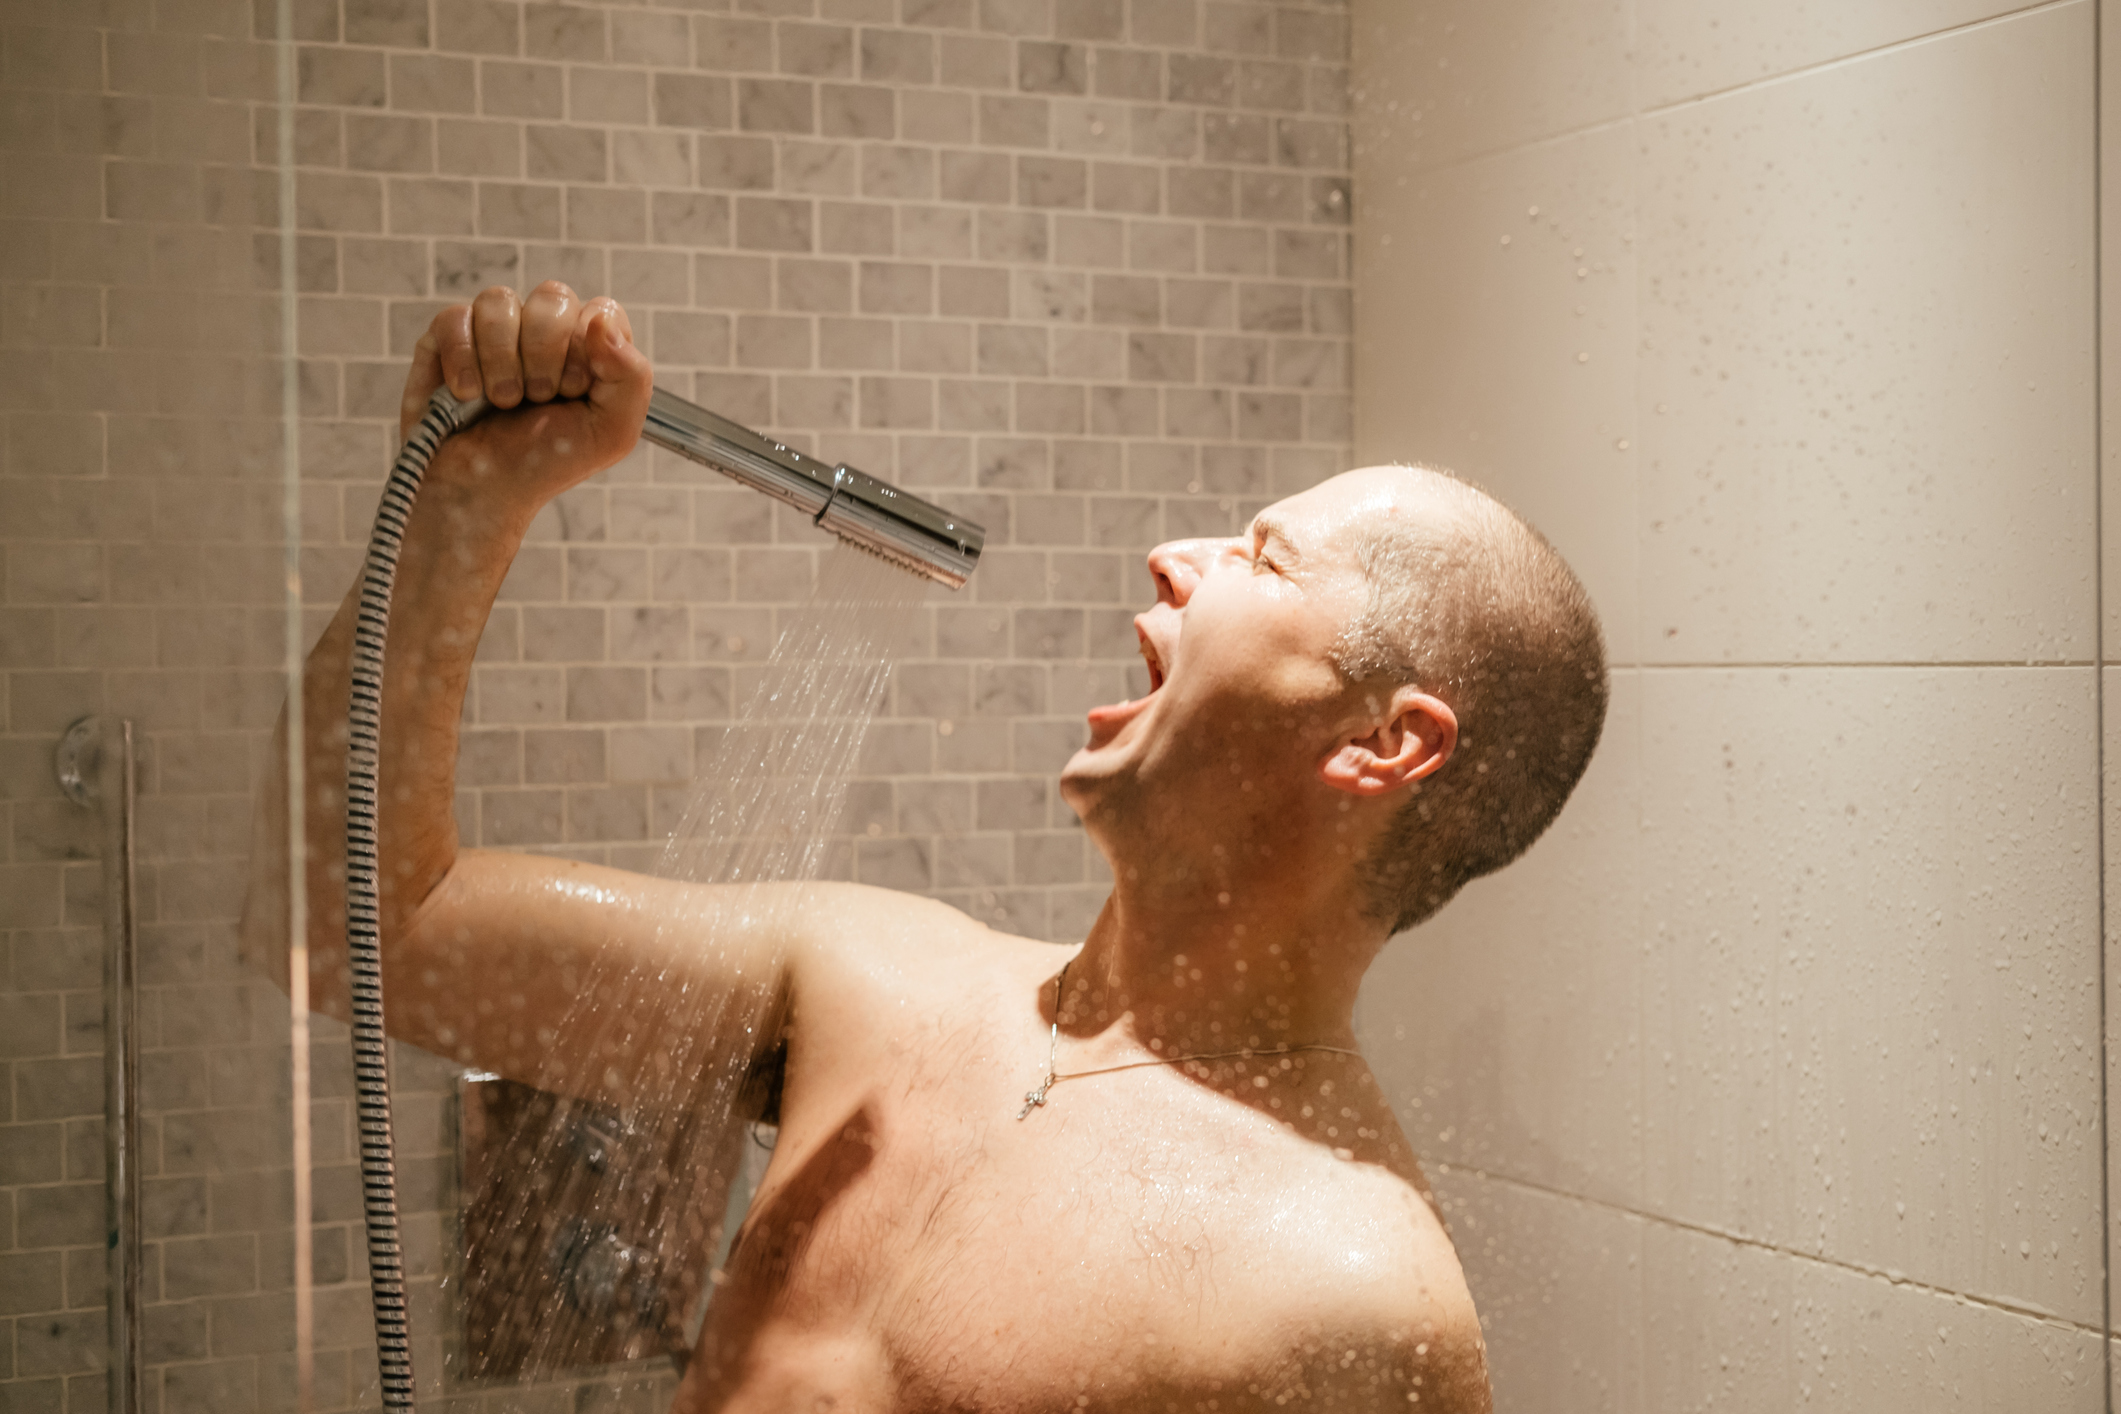 Lifestyle image of a bald man singing in the shower, holidng the handset shower like a microphone